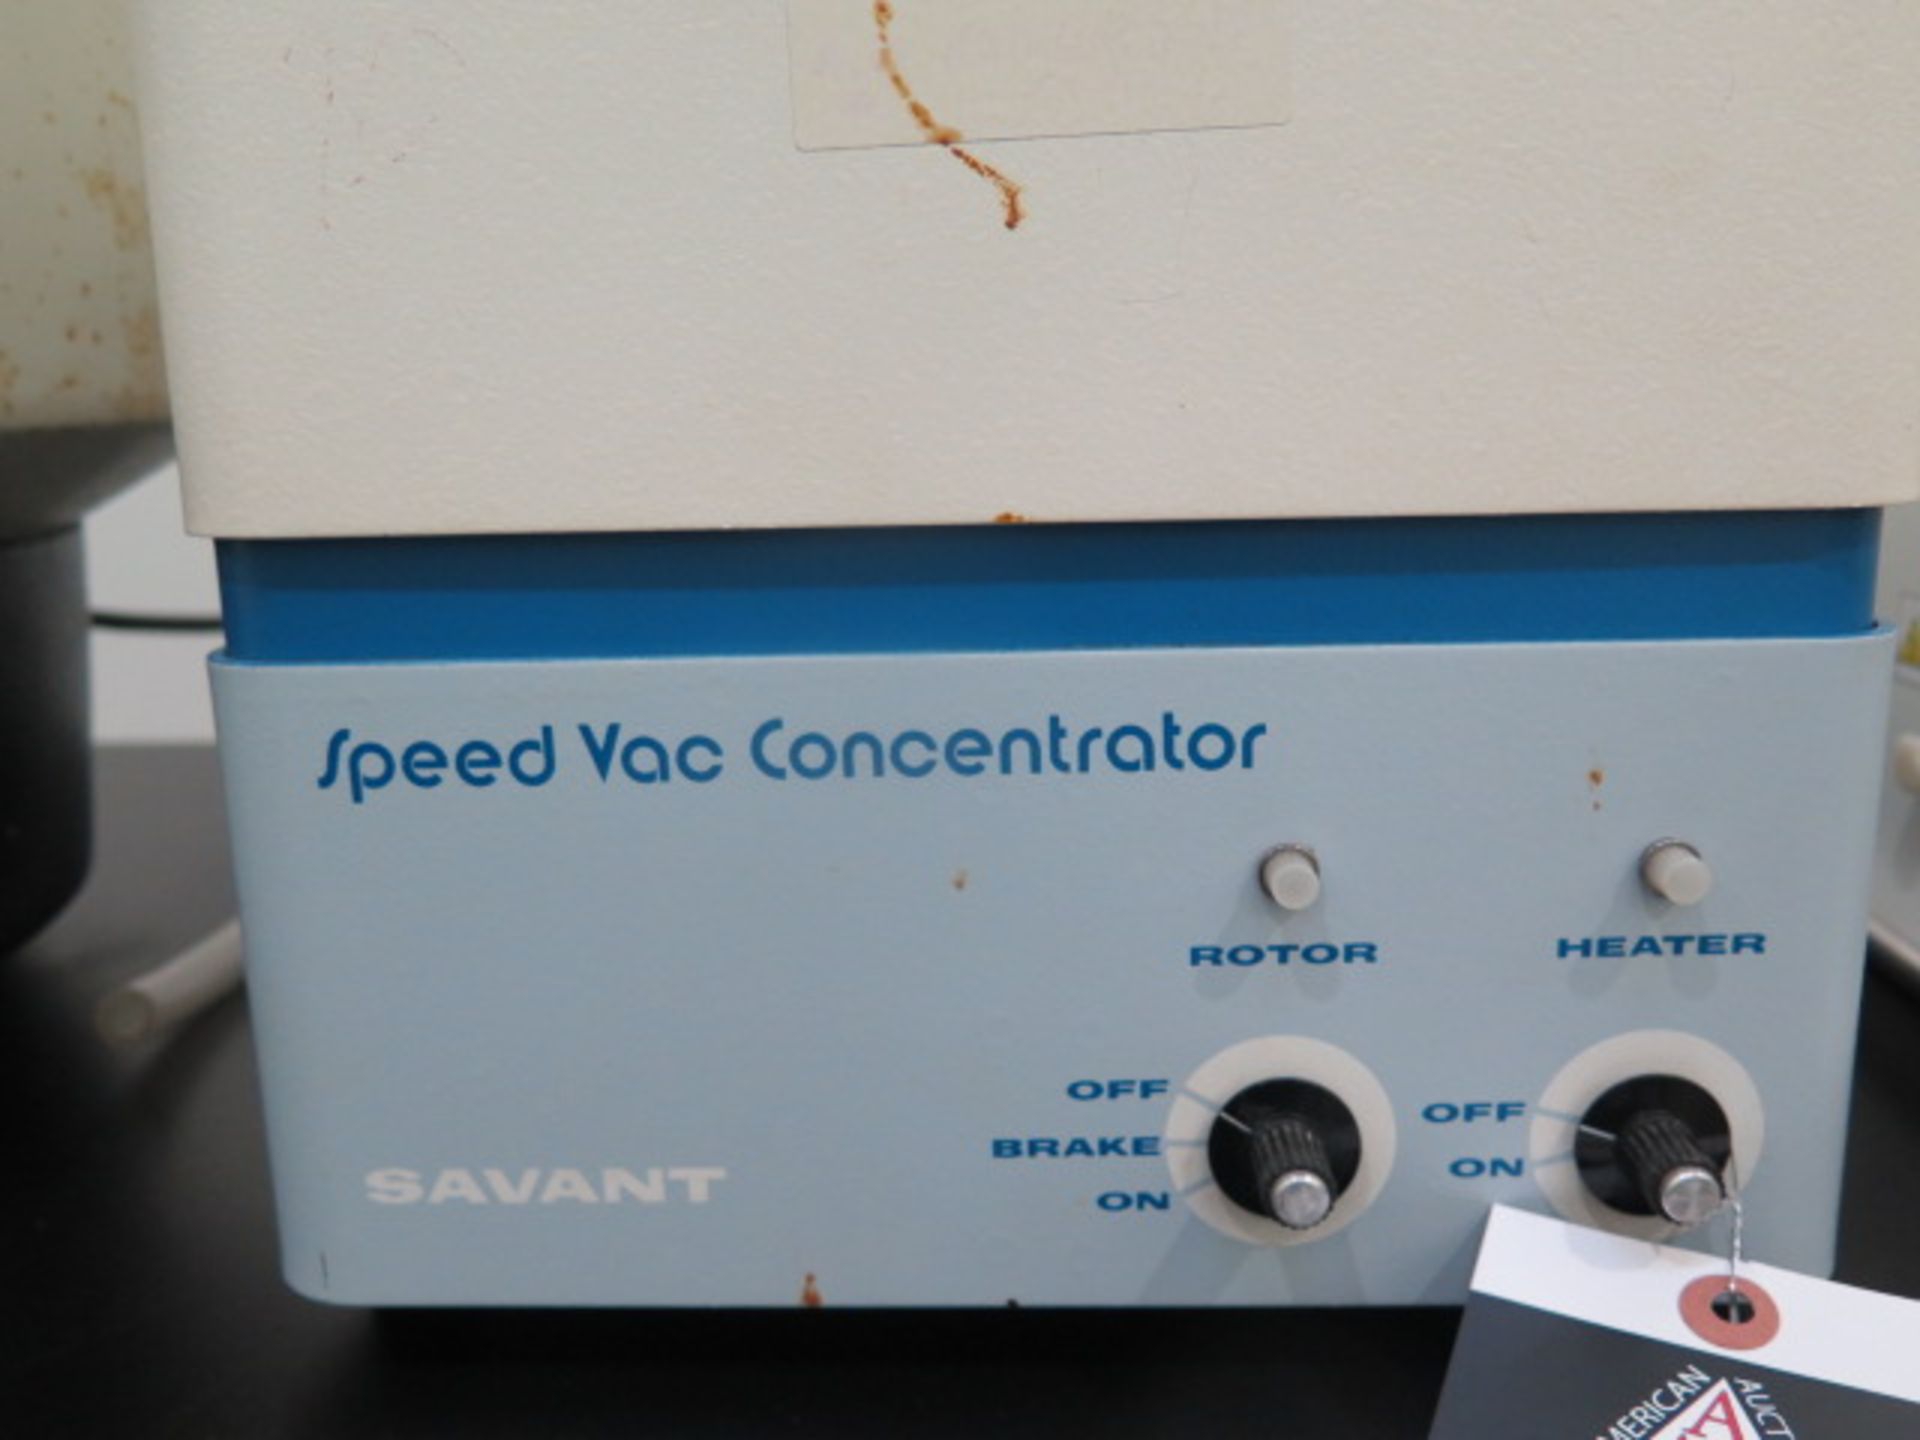 Savant "Speed Vac Concentrator" Vacuum Centrifuge (SOLD AS-IS - NO WARRANTY) - Image 5 of 6